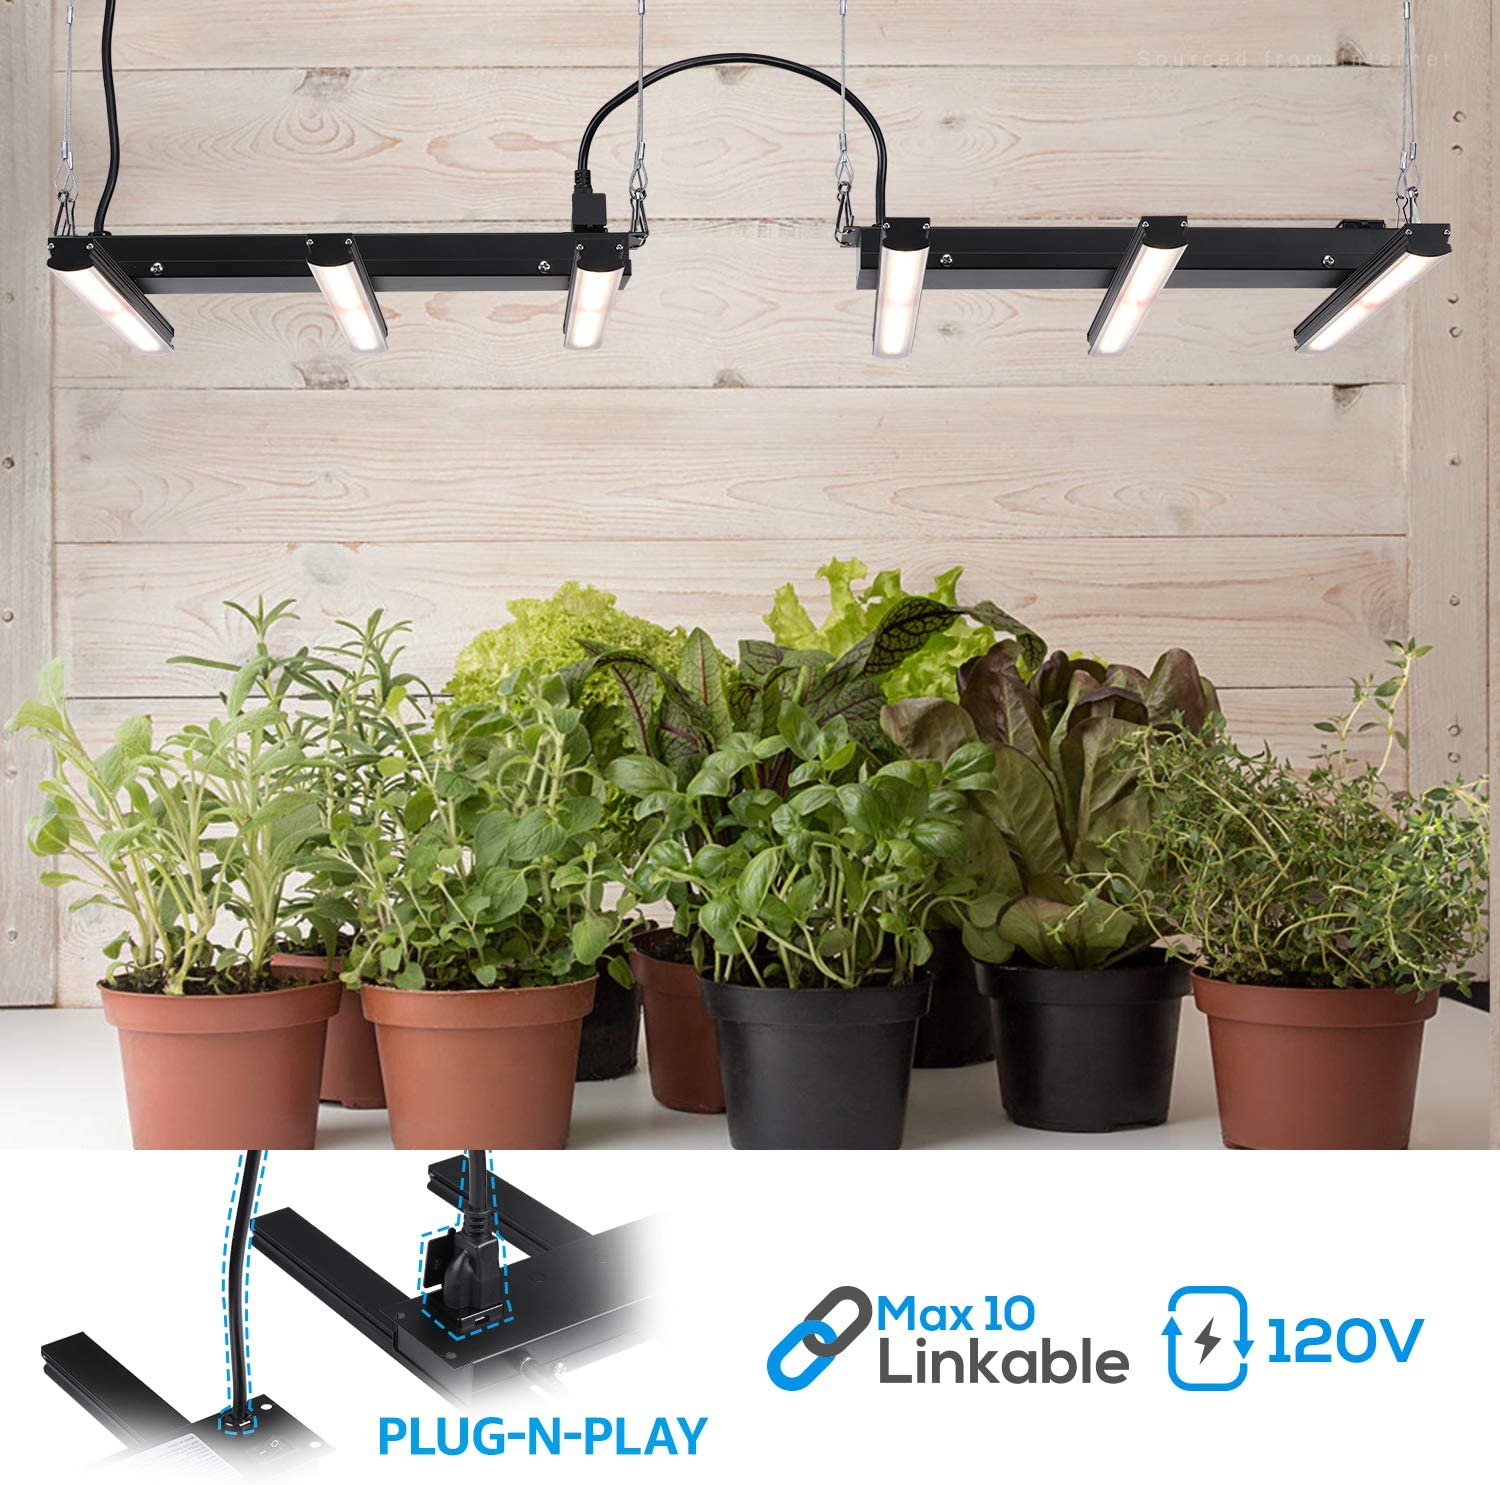 TORCHSTAR LED Indoor Plant Grow Light, Linkable Full Spectrum Hanging Mount Fixture, 140 LEDs Plug & Play Lighting, Sunlike 4320lm for Mints, Tomatoes, Chili, 3 Years Warranty